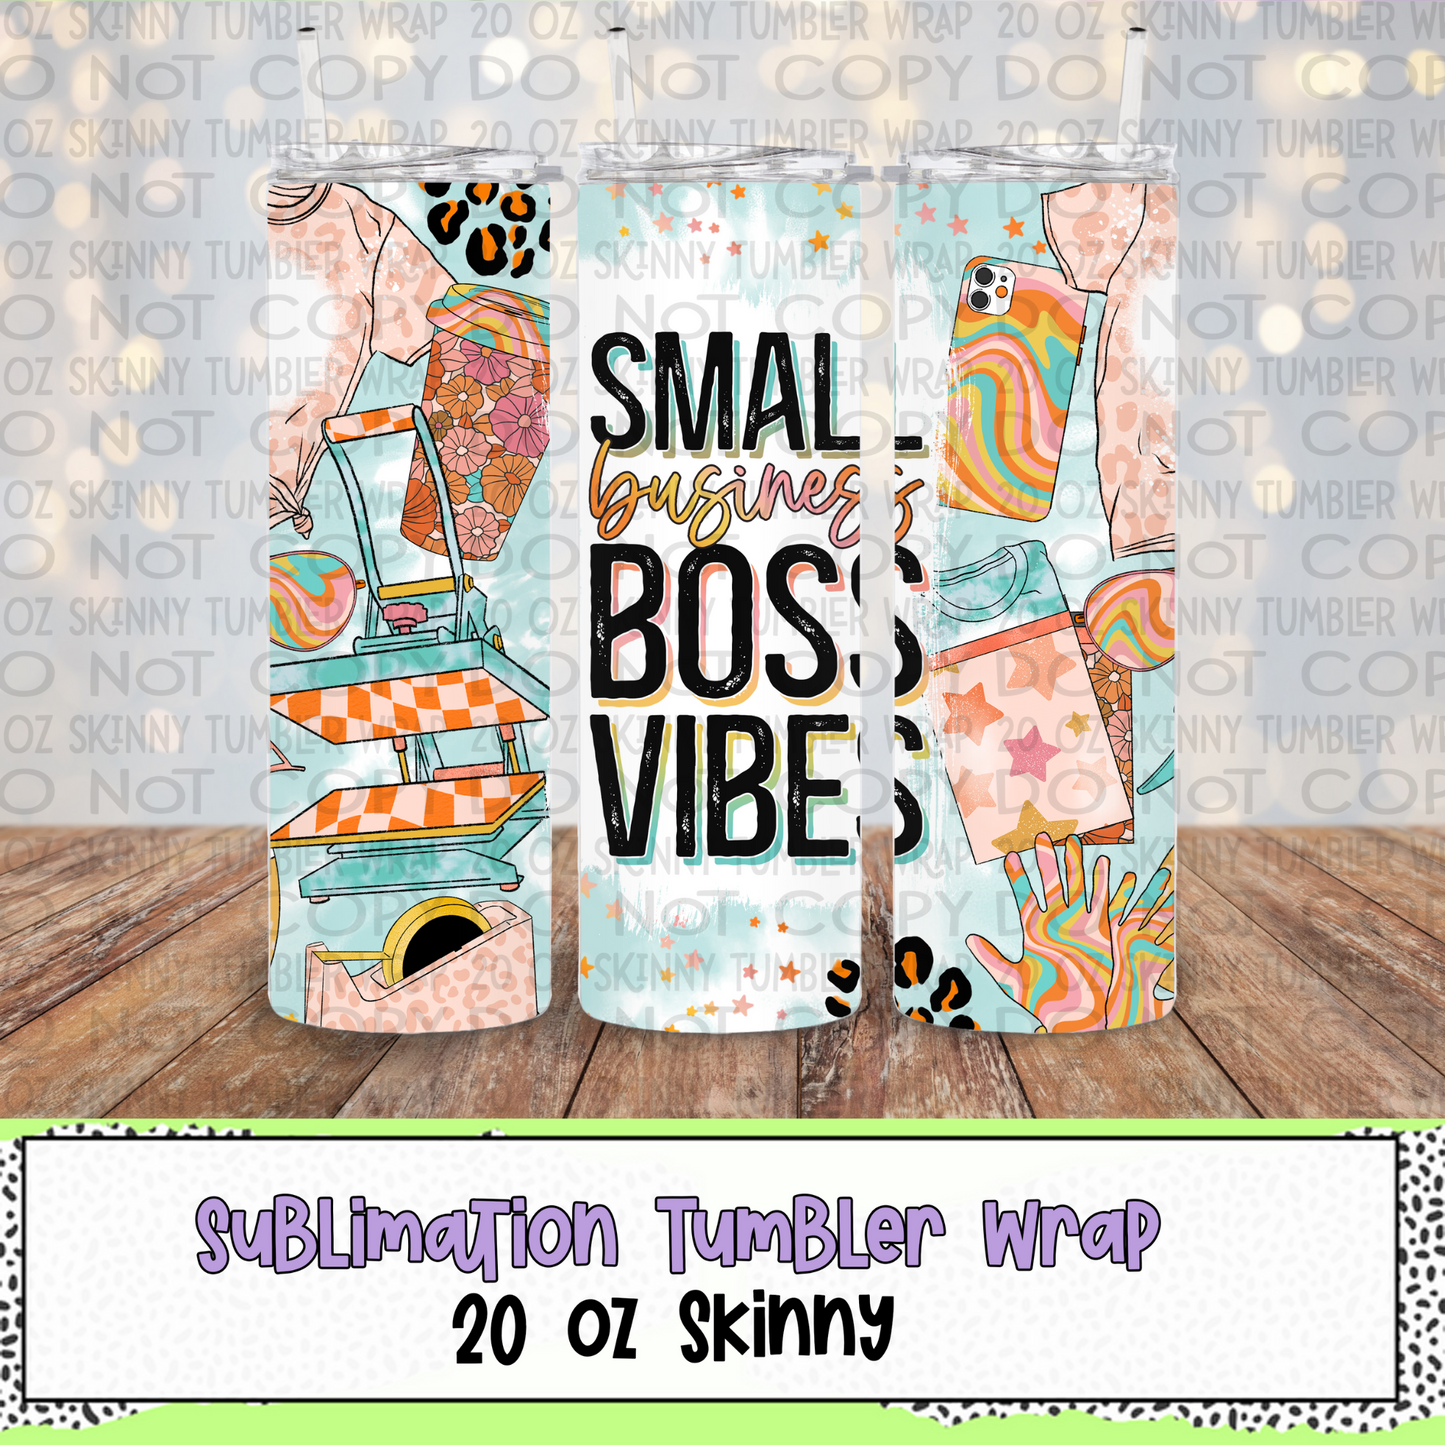 Small Business Boss Blue Vibes 20 Oz Skinny Tumbler Wrap - Sublimation Transfer - RTS